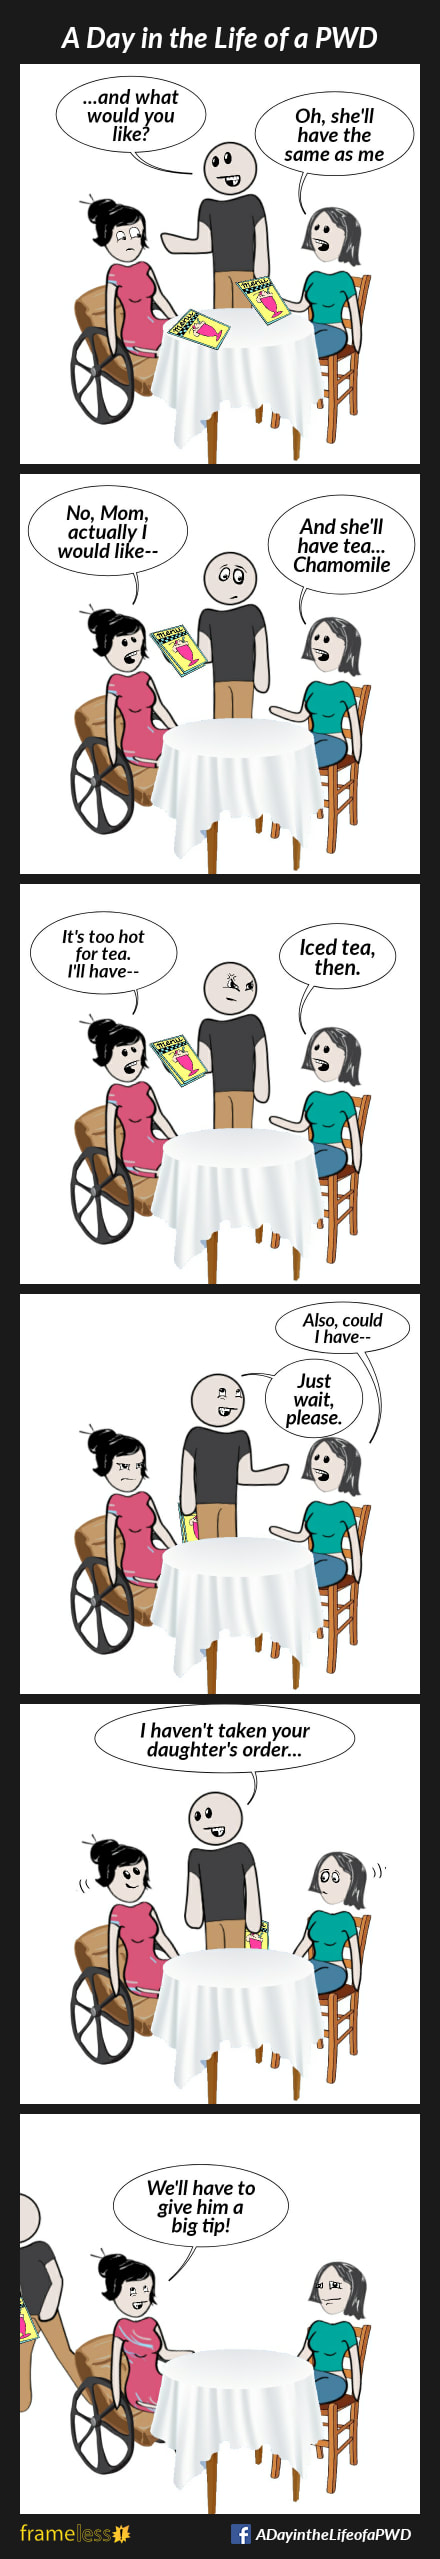 COMIC STRIP 
A Day in the Life of a PWD (Person With a Disability) 

Frame 1:
A woman in a wheelchair is sitting in a restaurant with her mother.
WAITER (to woman): And what would you like?
MOTHER: Oh, she'll have the same as me.

Frame 2:
WOMAN: No, Mom, actually I would like--
MOTHER: And she'll have tea...Chamomile. 

Frame 3:
WOMAN: It's too hot for tea. I'll have--
MOTHER: Iced tea, then.
The waiter frowns.

Frame 4:
MOTHER: Also, could I have--
WAITER: Just wait, please.

Frame 5:
WAITER: I haven't taken your daughter's order...
The woman smiles.

Frame 6:
After taking the woman's order, the waiter goes to the kitchen.
WOMAN (to mother): We'll have to give him a big tip!